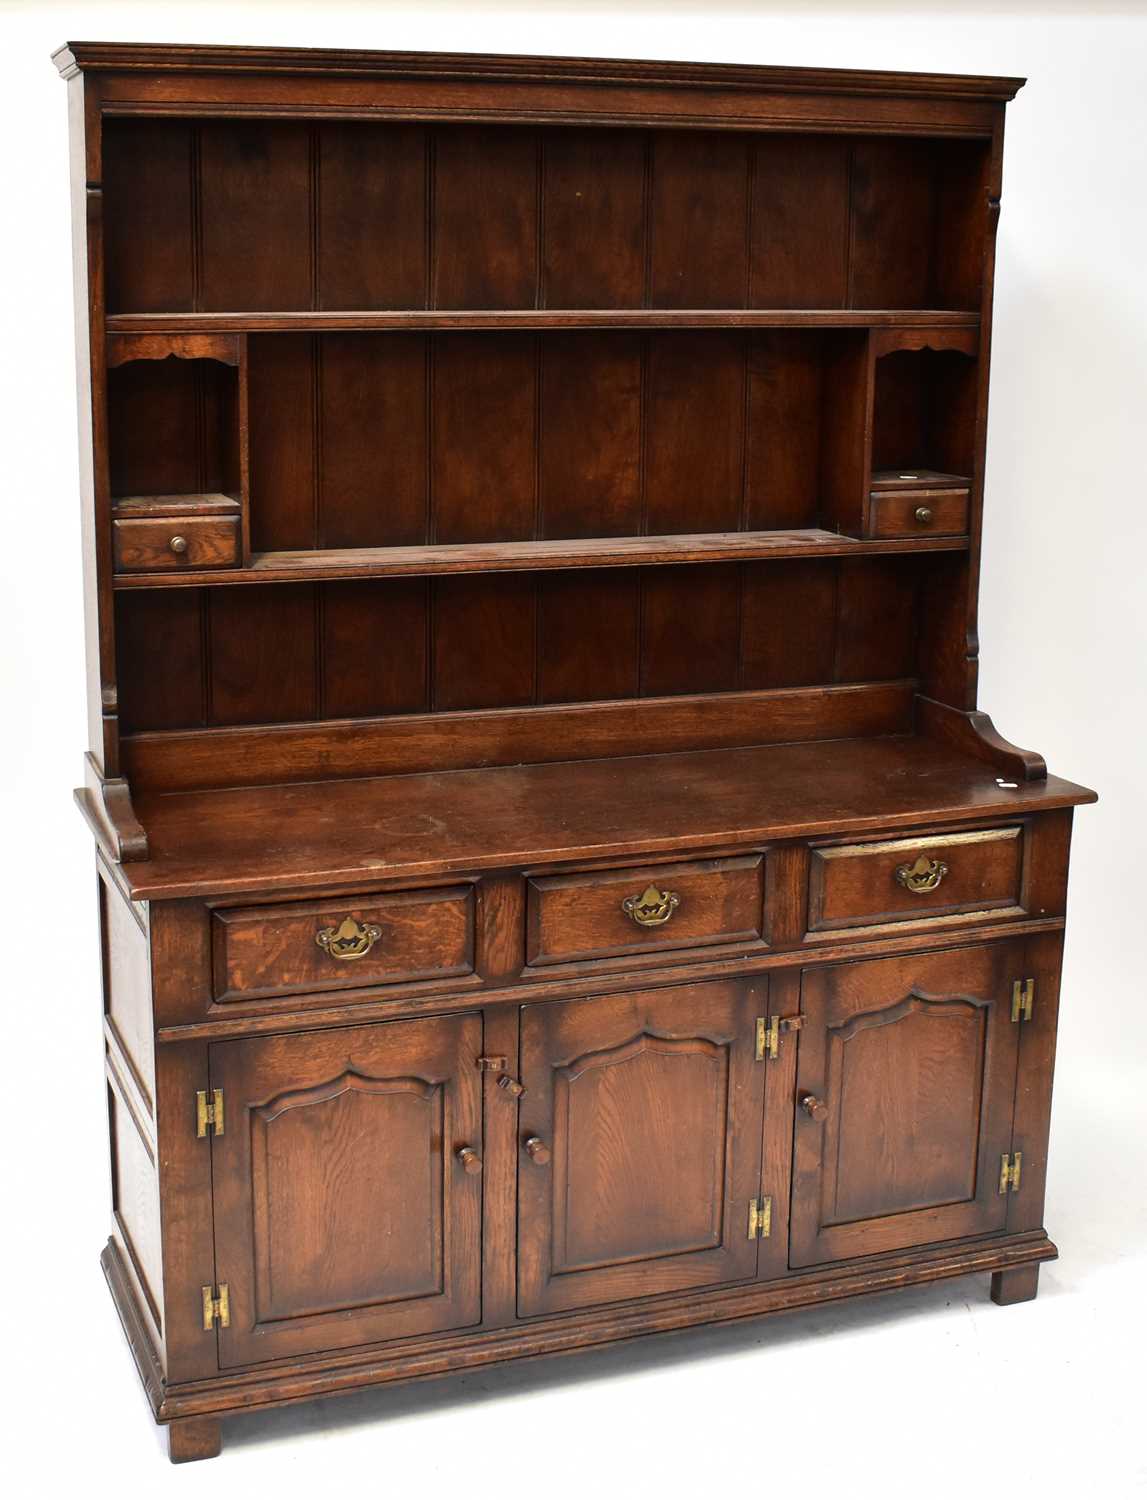 A Georgian-style oak dresser with boarded plate rack incorporating two spice shelves, above a base